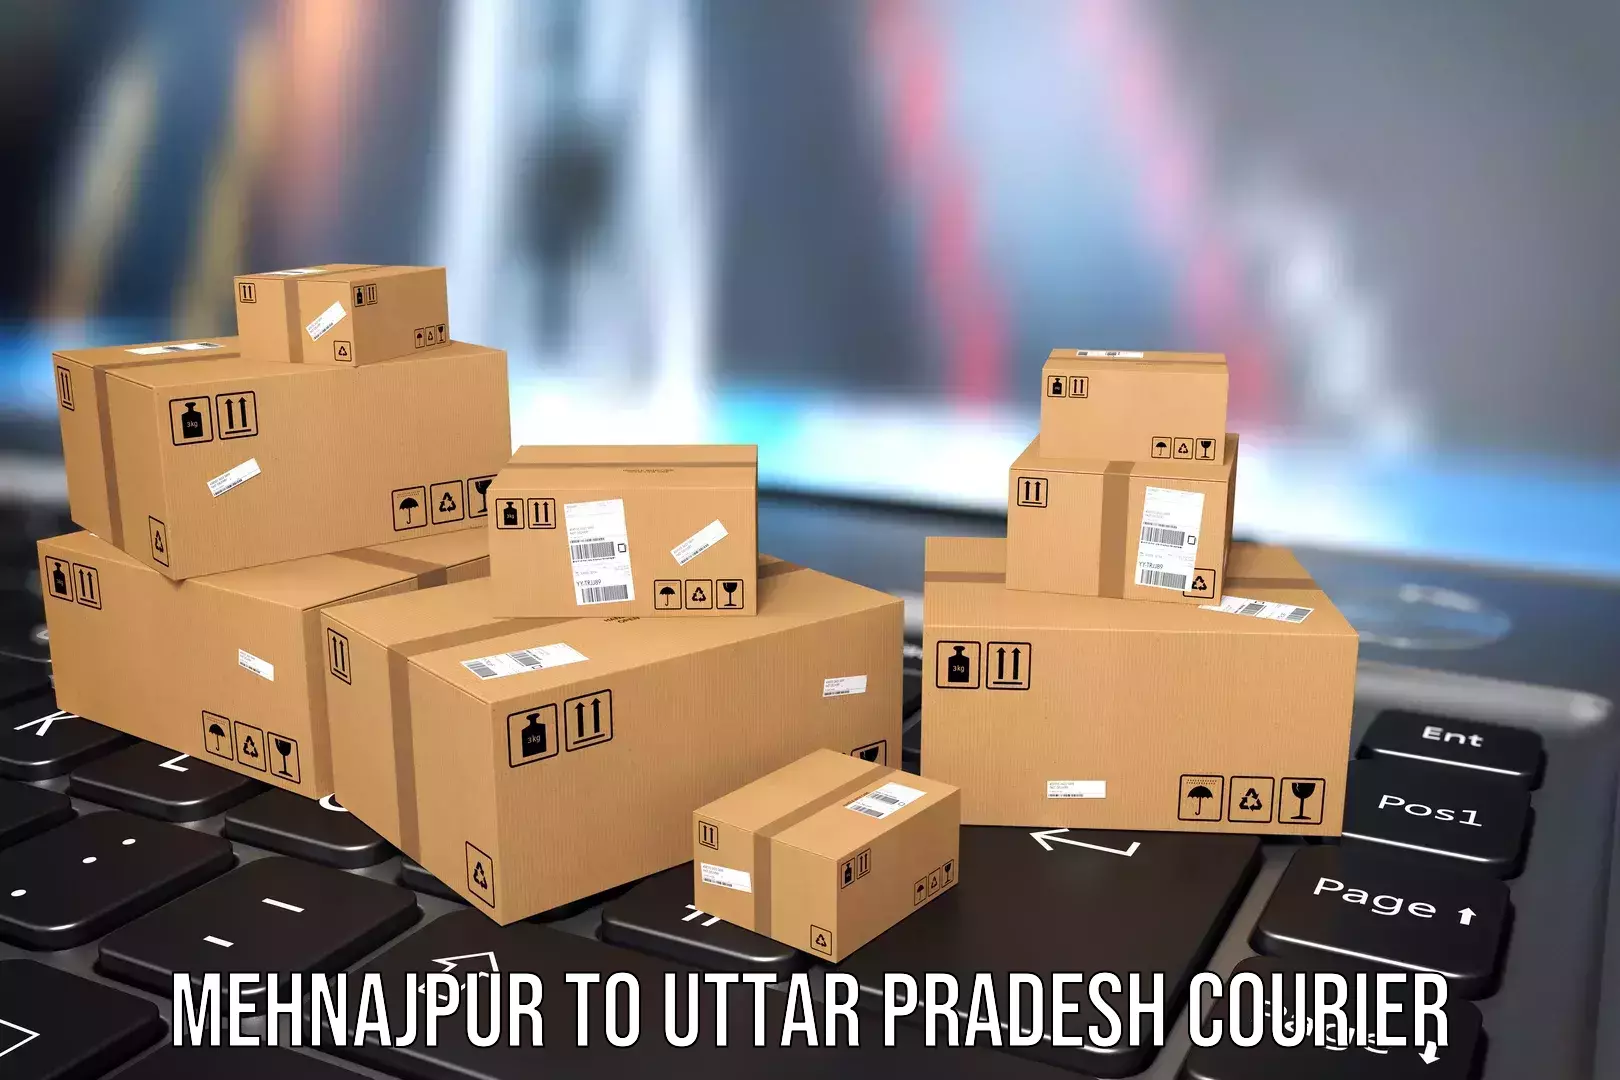 Urgent luggage shipment in Mehnajpur to Saharanpur